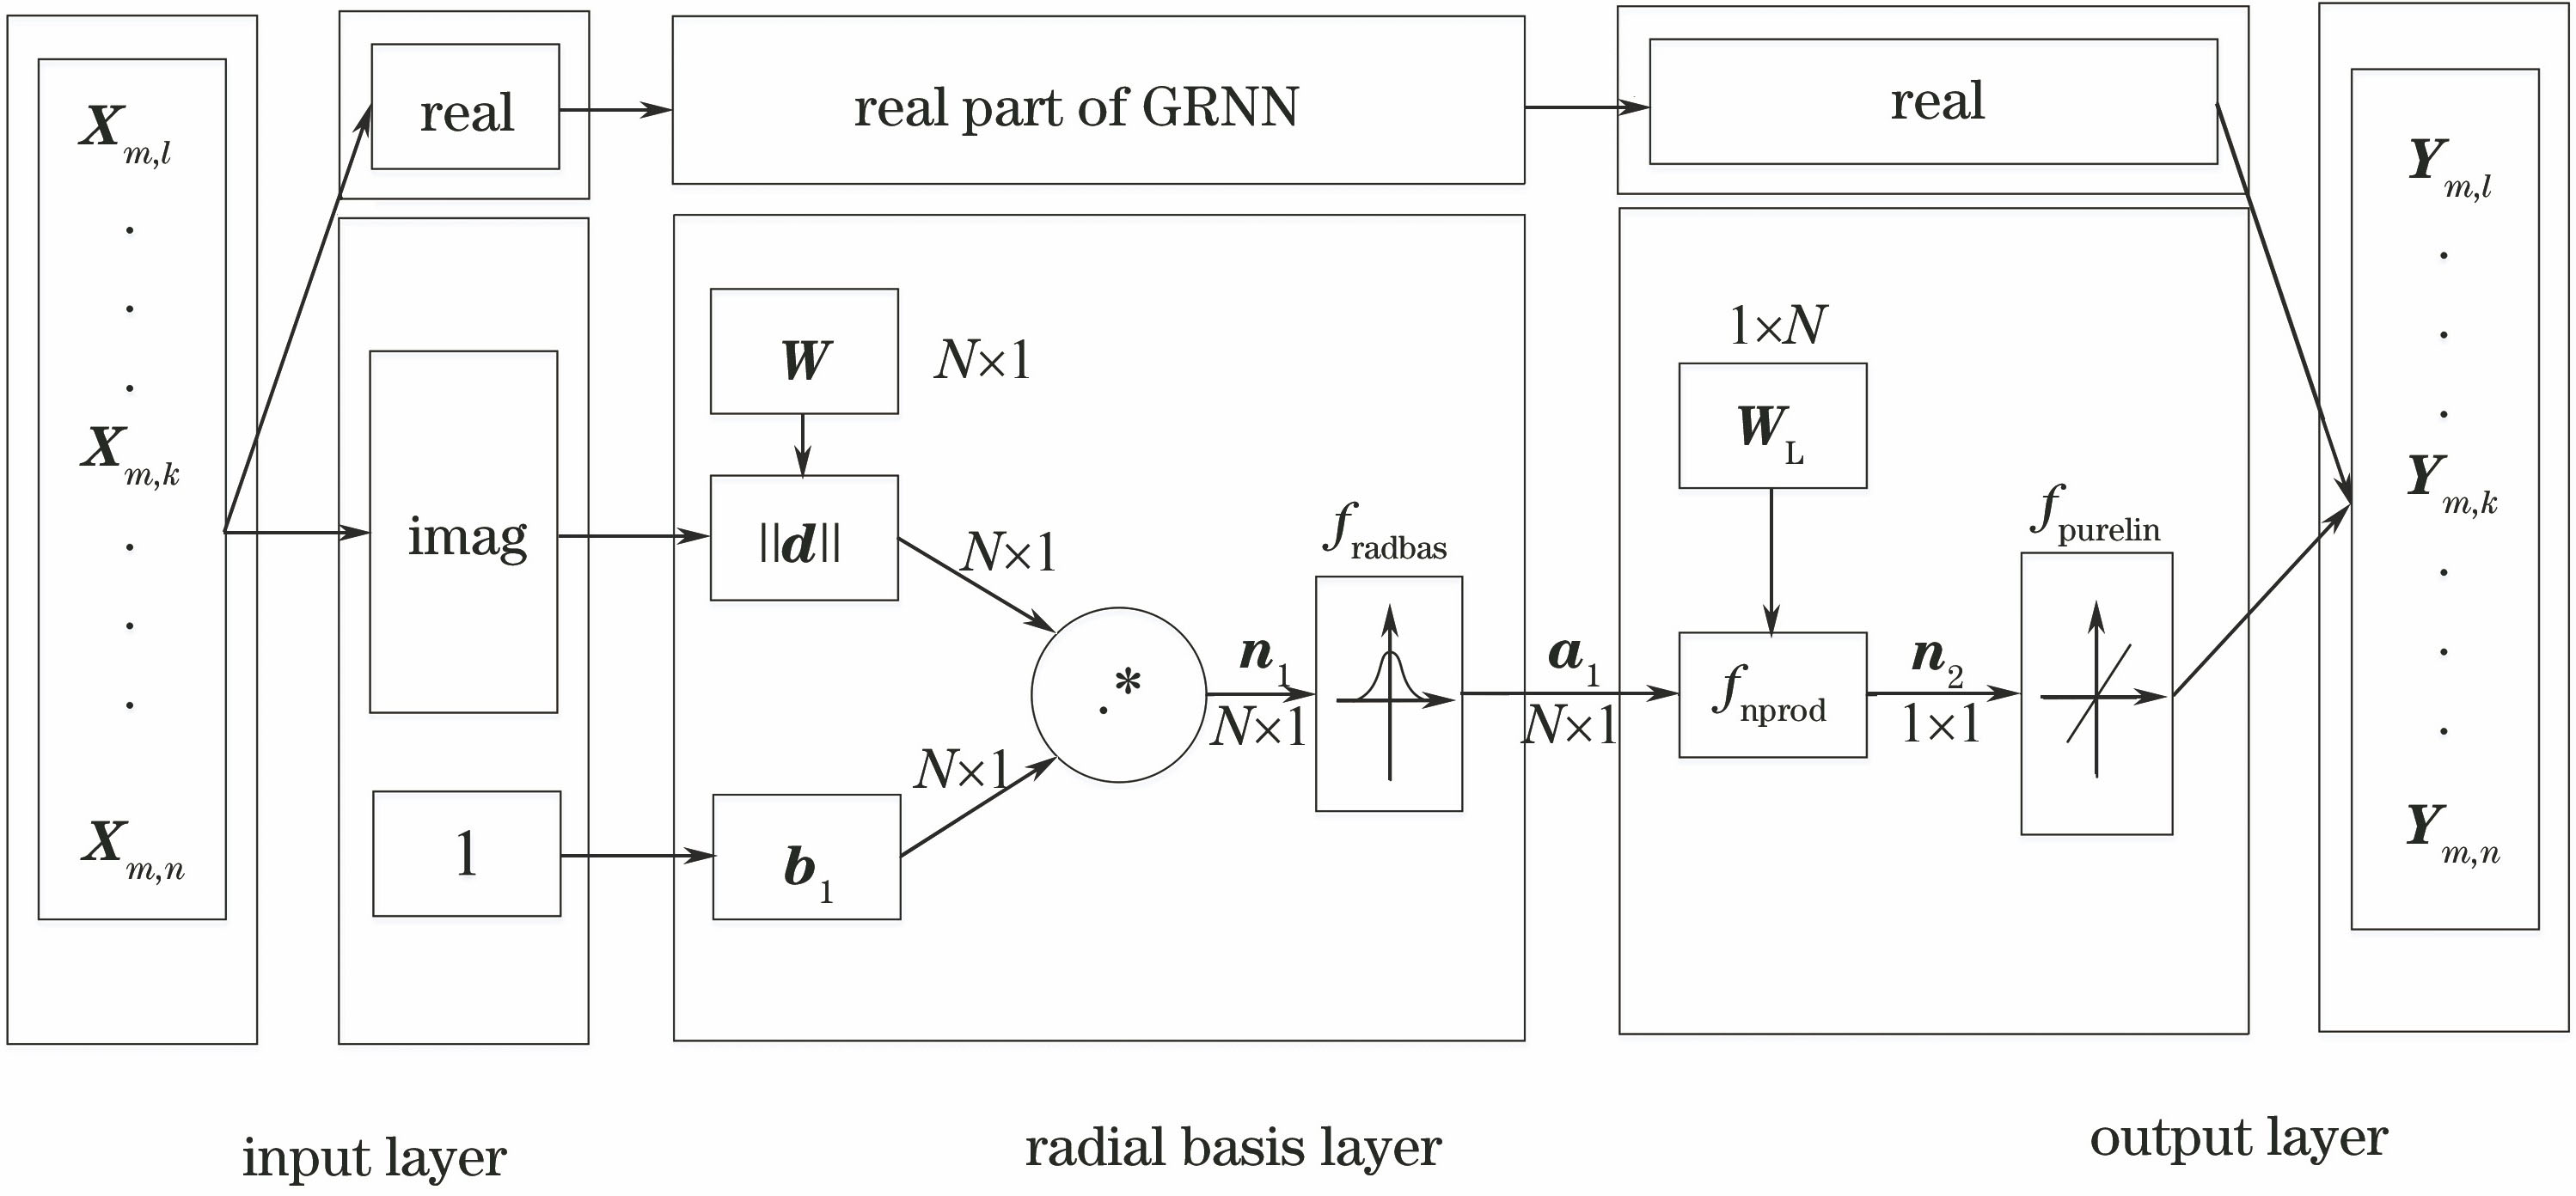 Architecture of the proposed GRNN-NLE for QAM CO-OFDM system